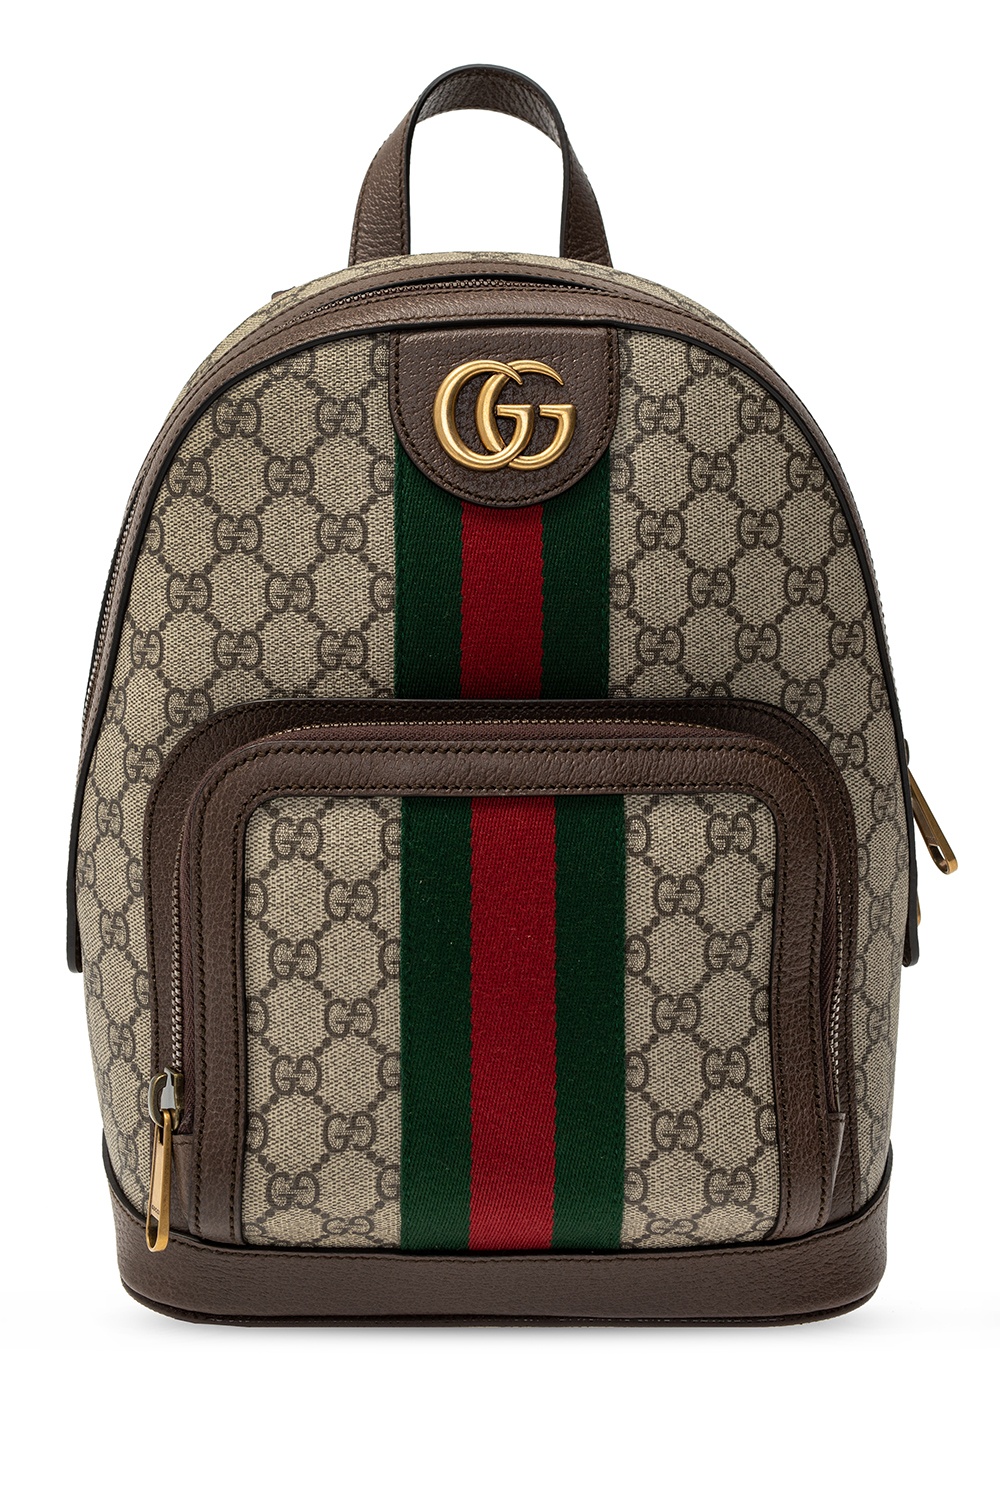 gucci ophidia backpack